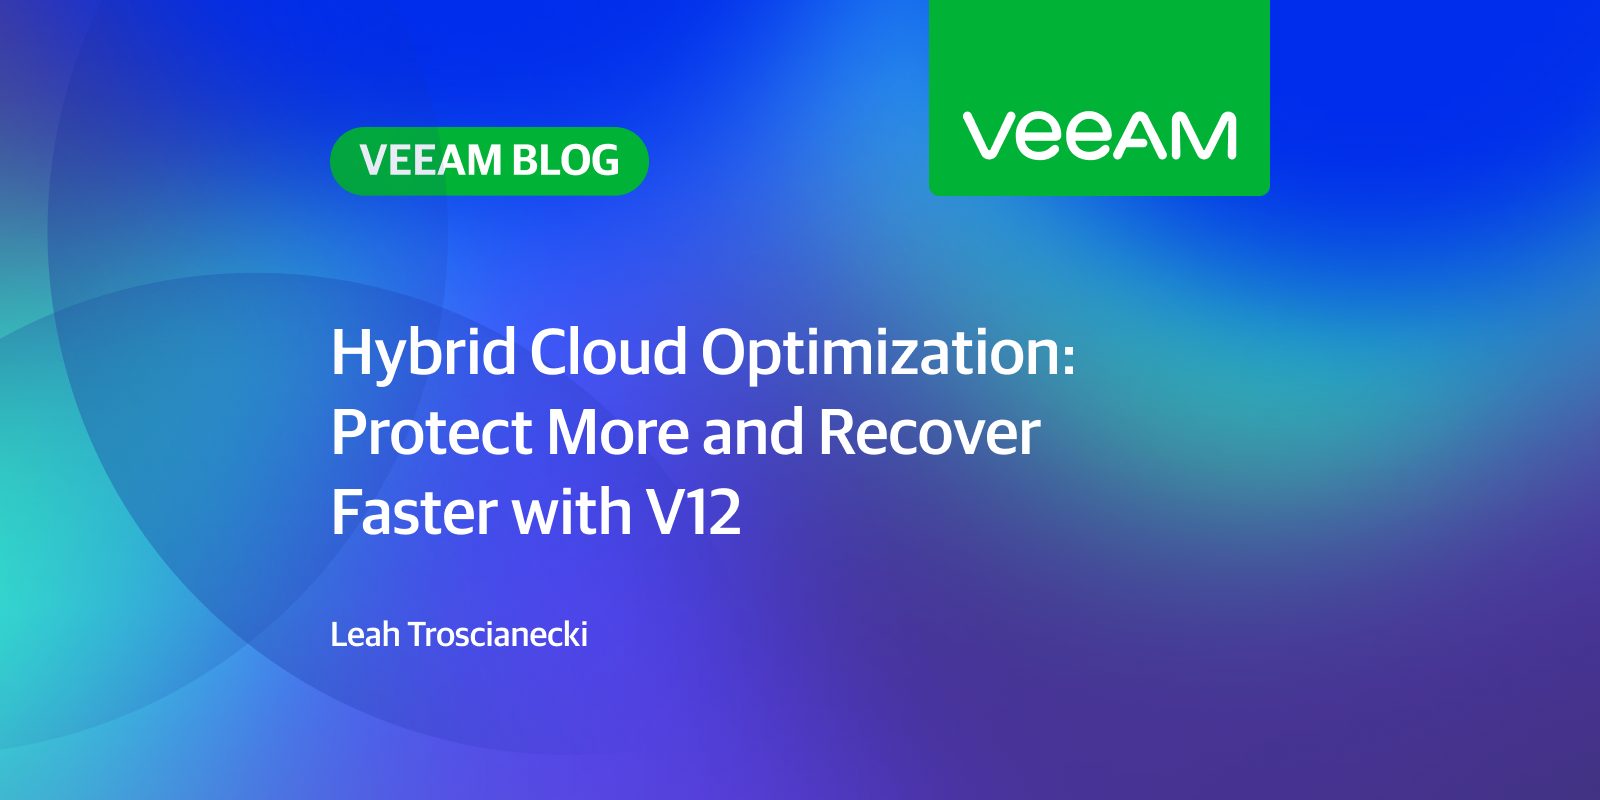 Hybrid cloud optimization: With V12, protect more and recover more quickly.